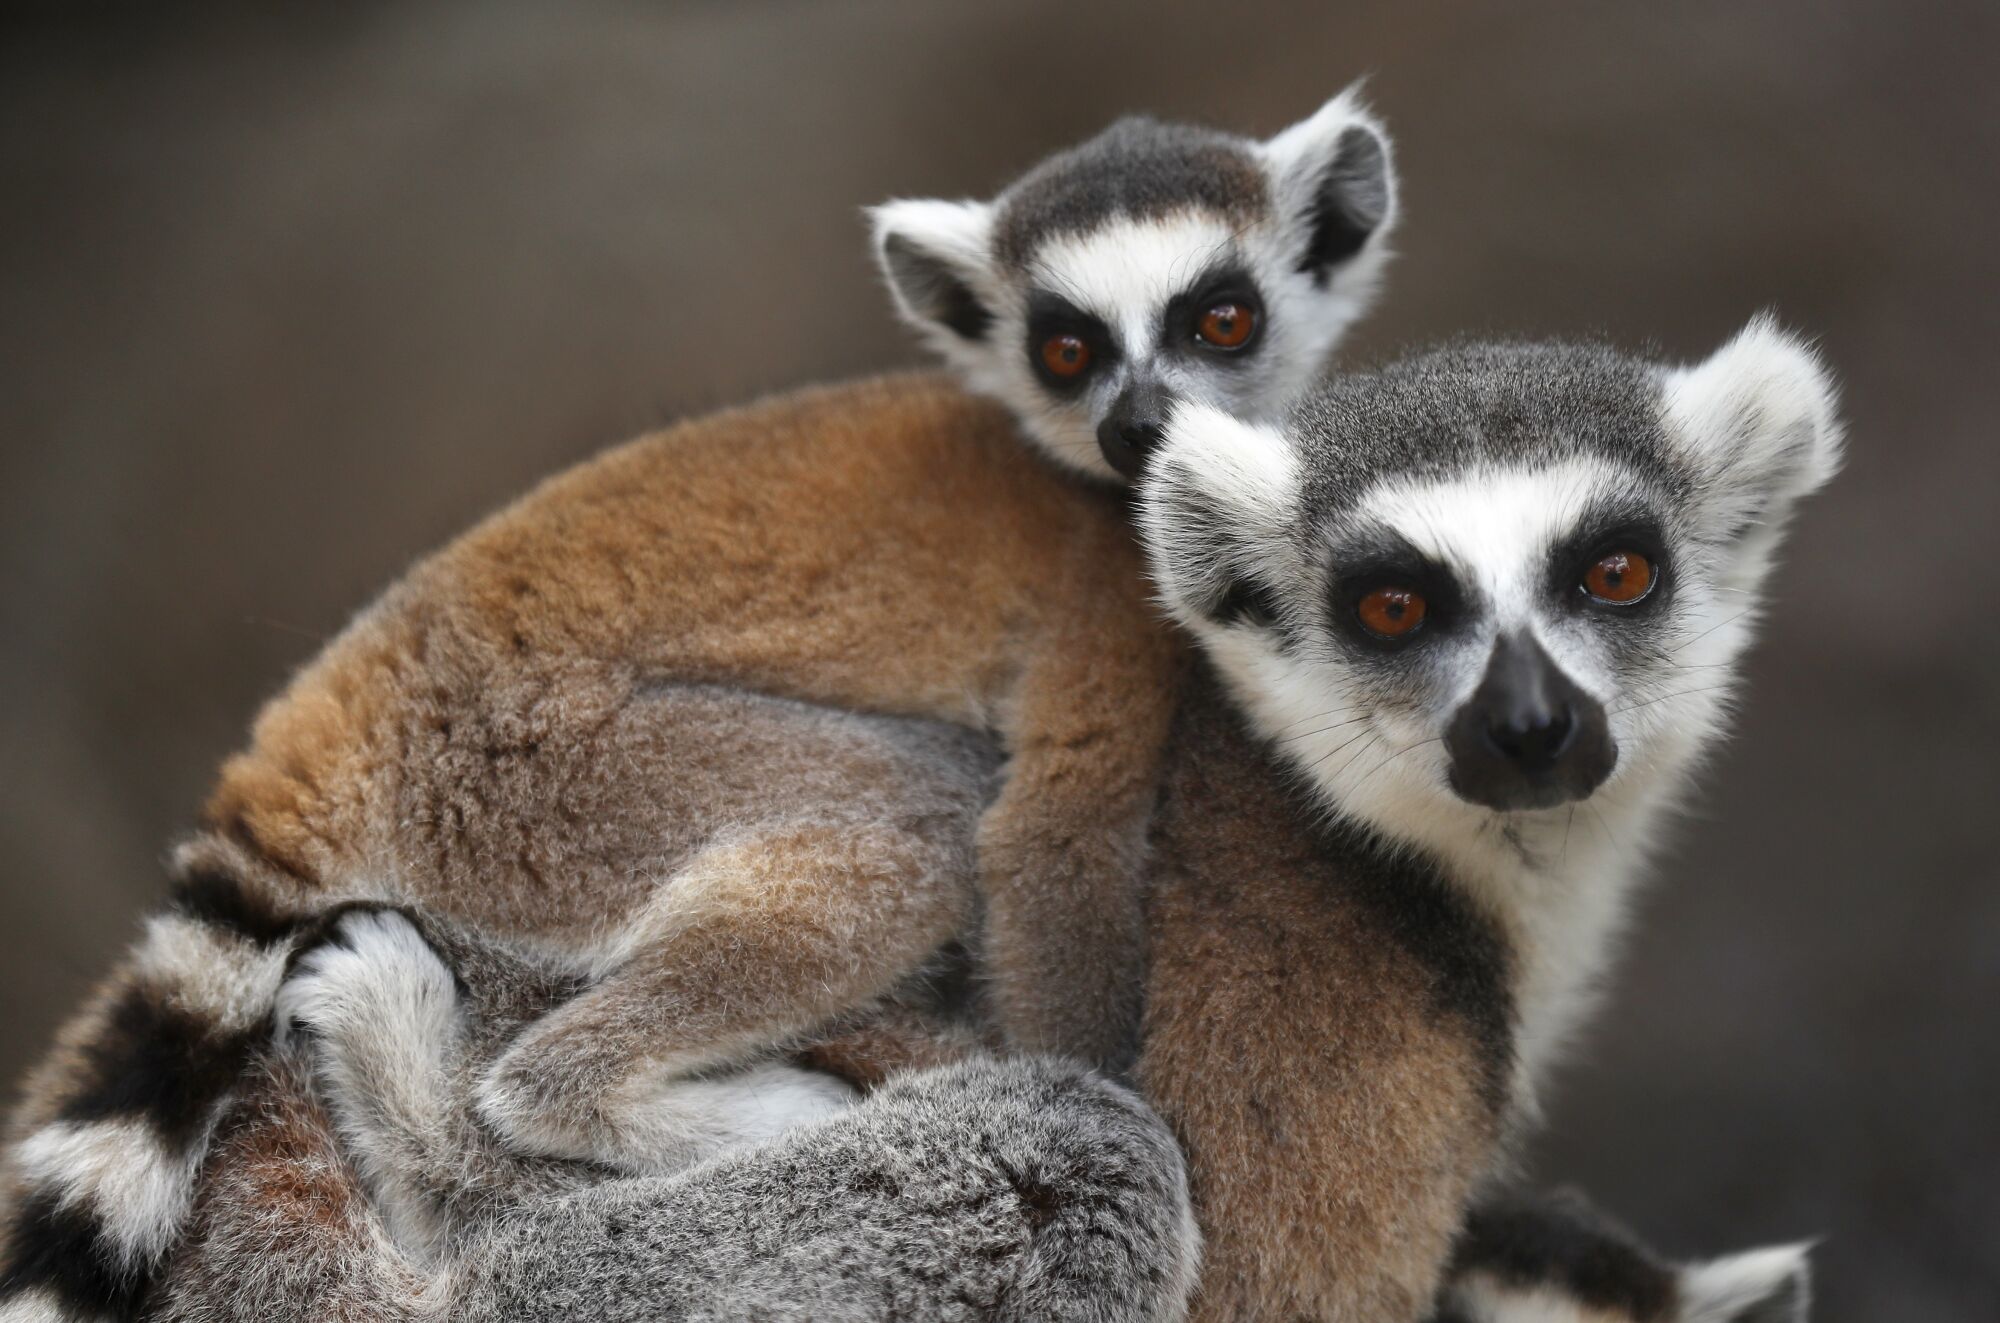 A ring-tailed Lemur carries a baby at the San Diego Zoo on May 19, 2020.